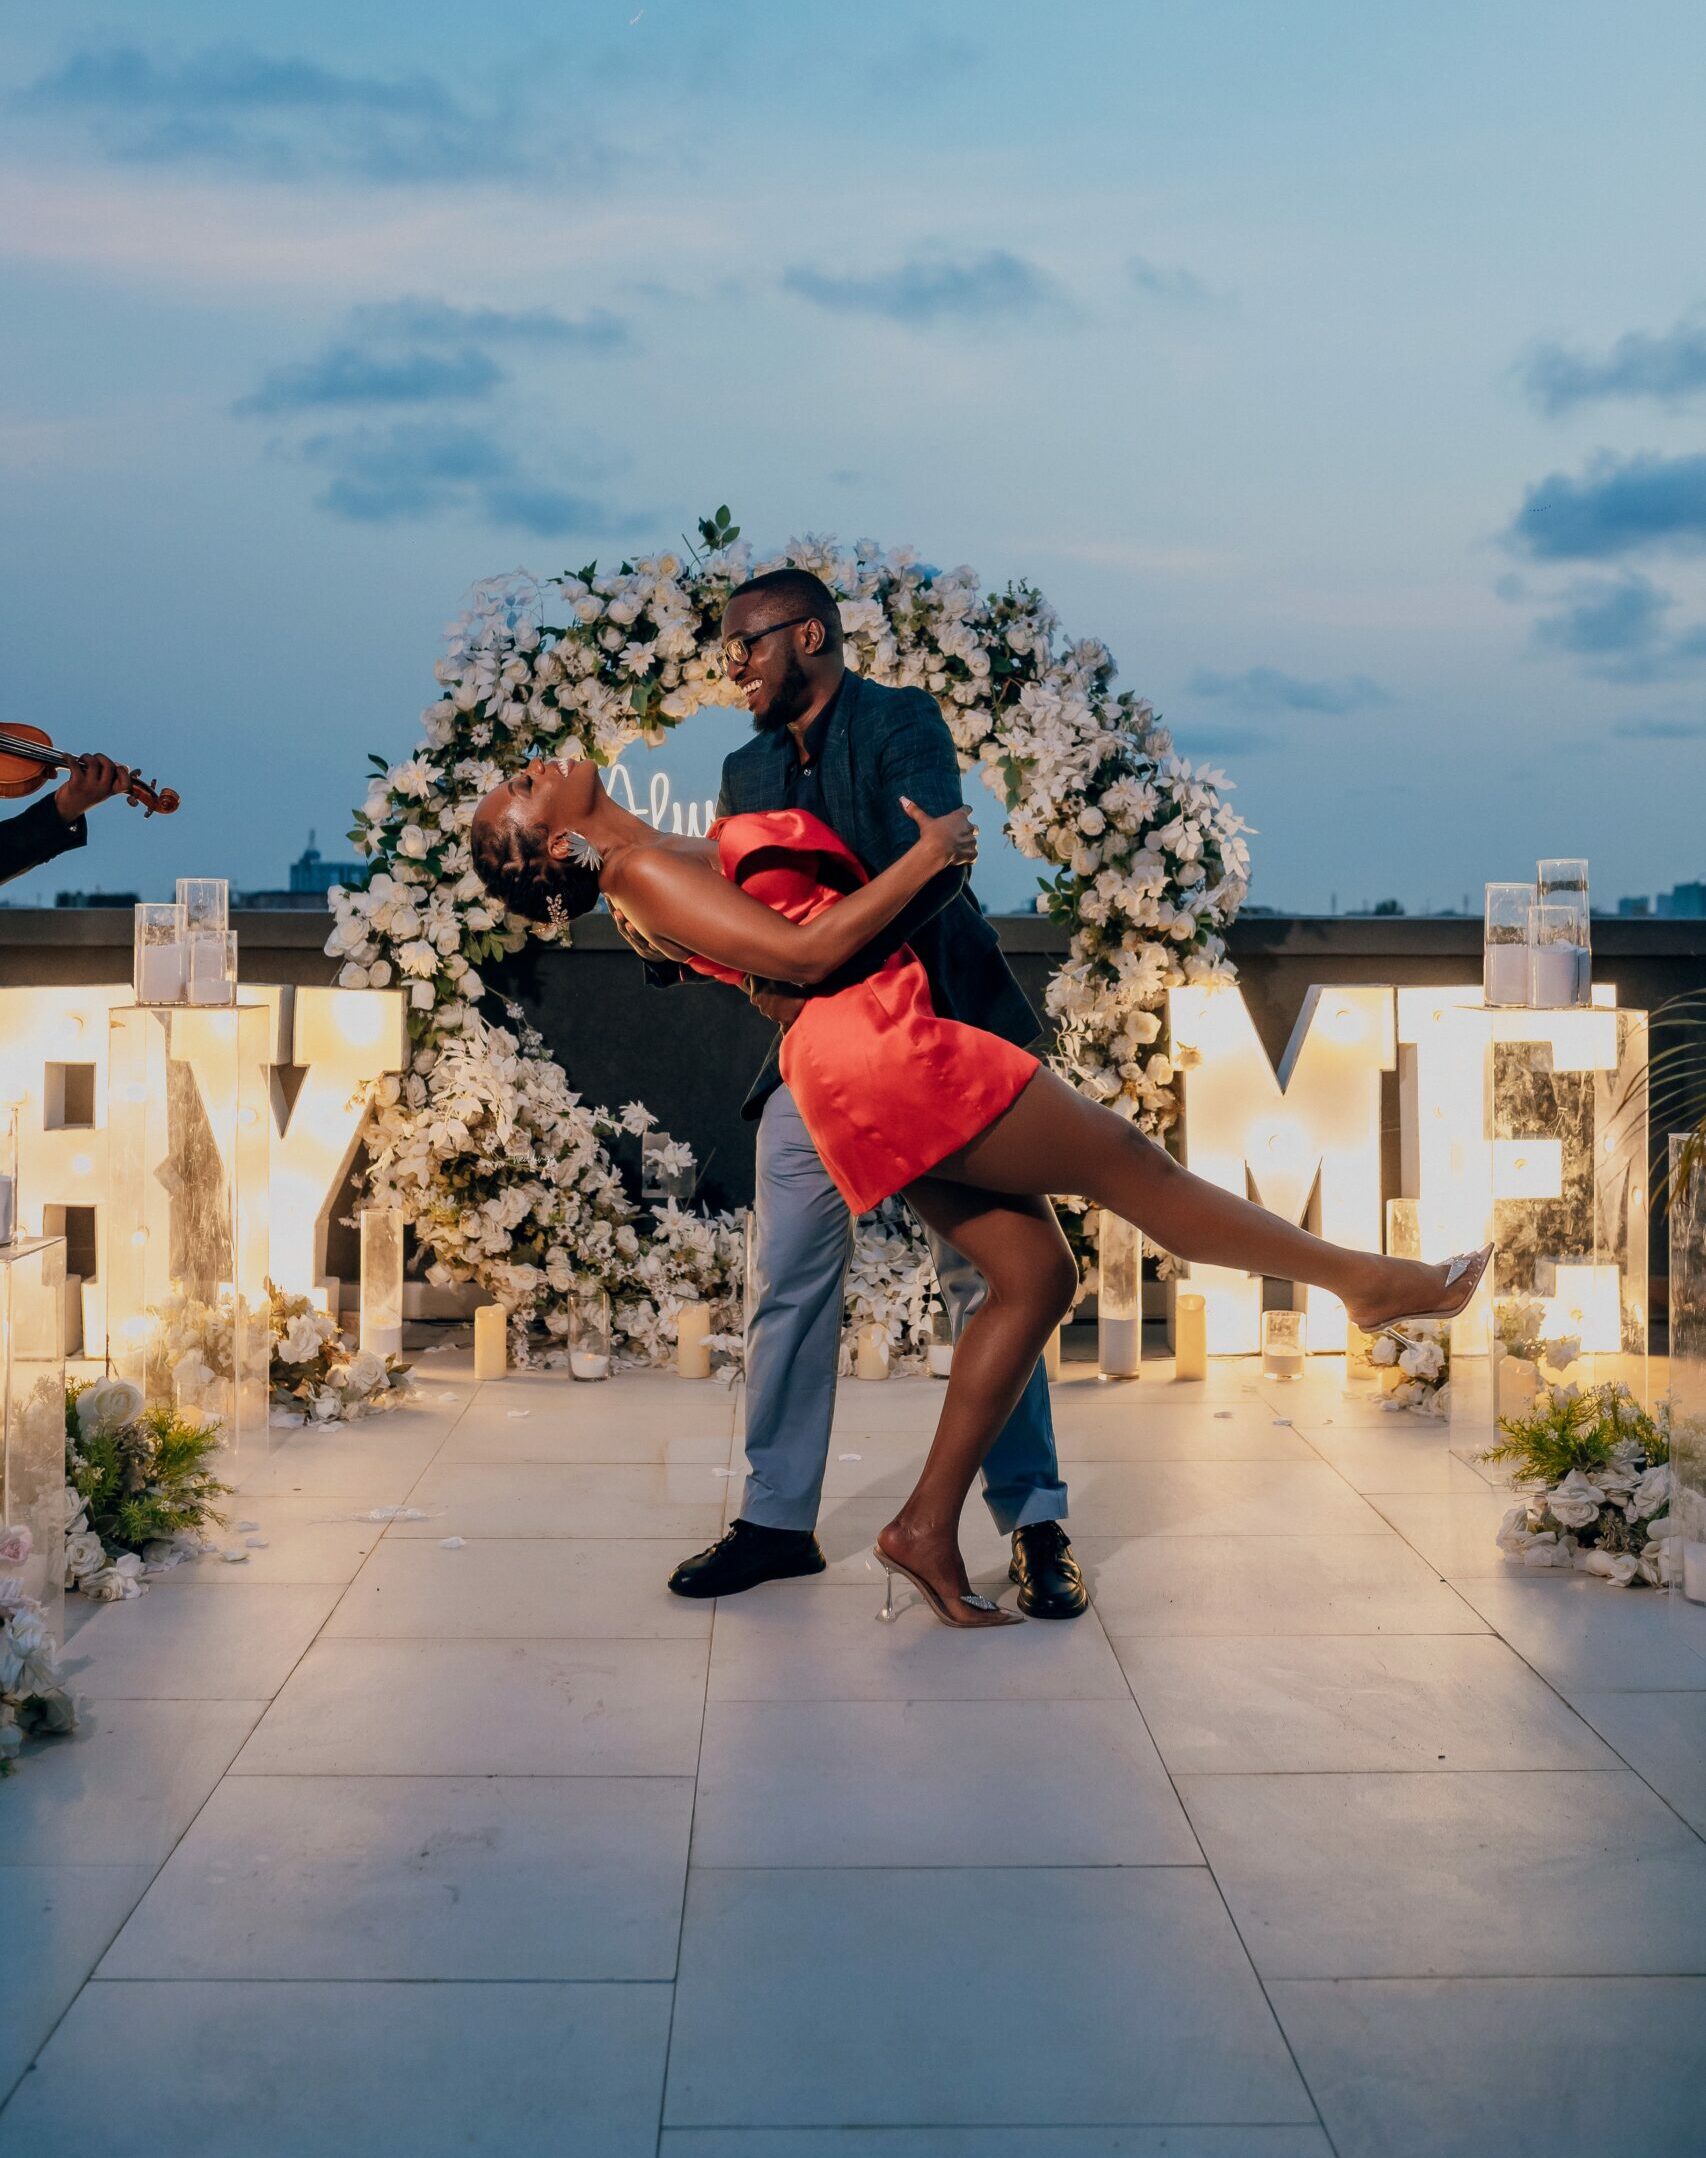 His Brother Did the Matchmaking and 2 Years Later, Nwaka Got a Sweet ‘Yes’ From The Woman of His Dreams!